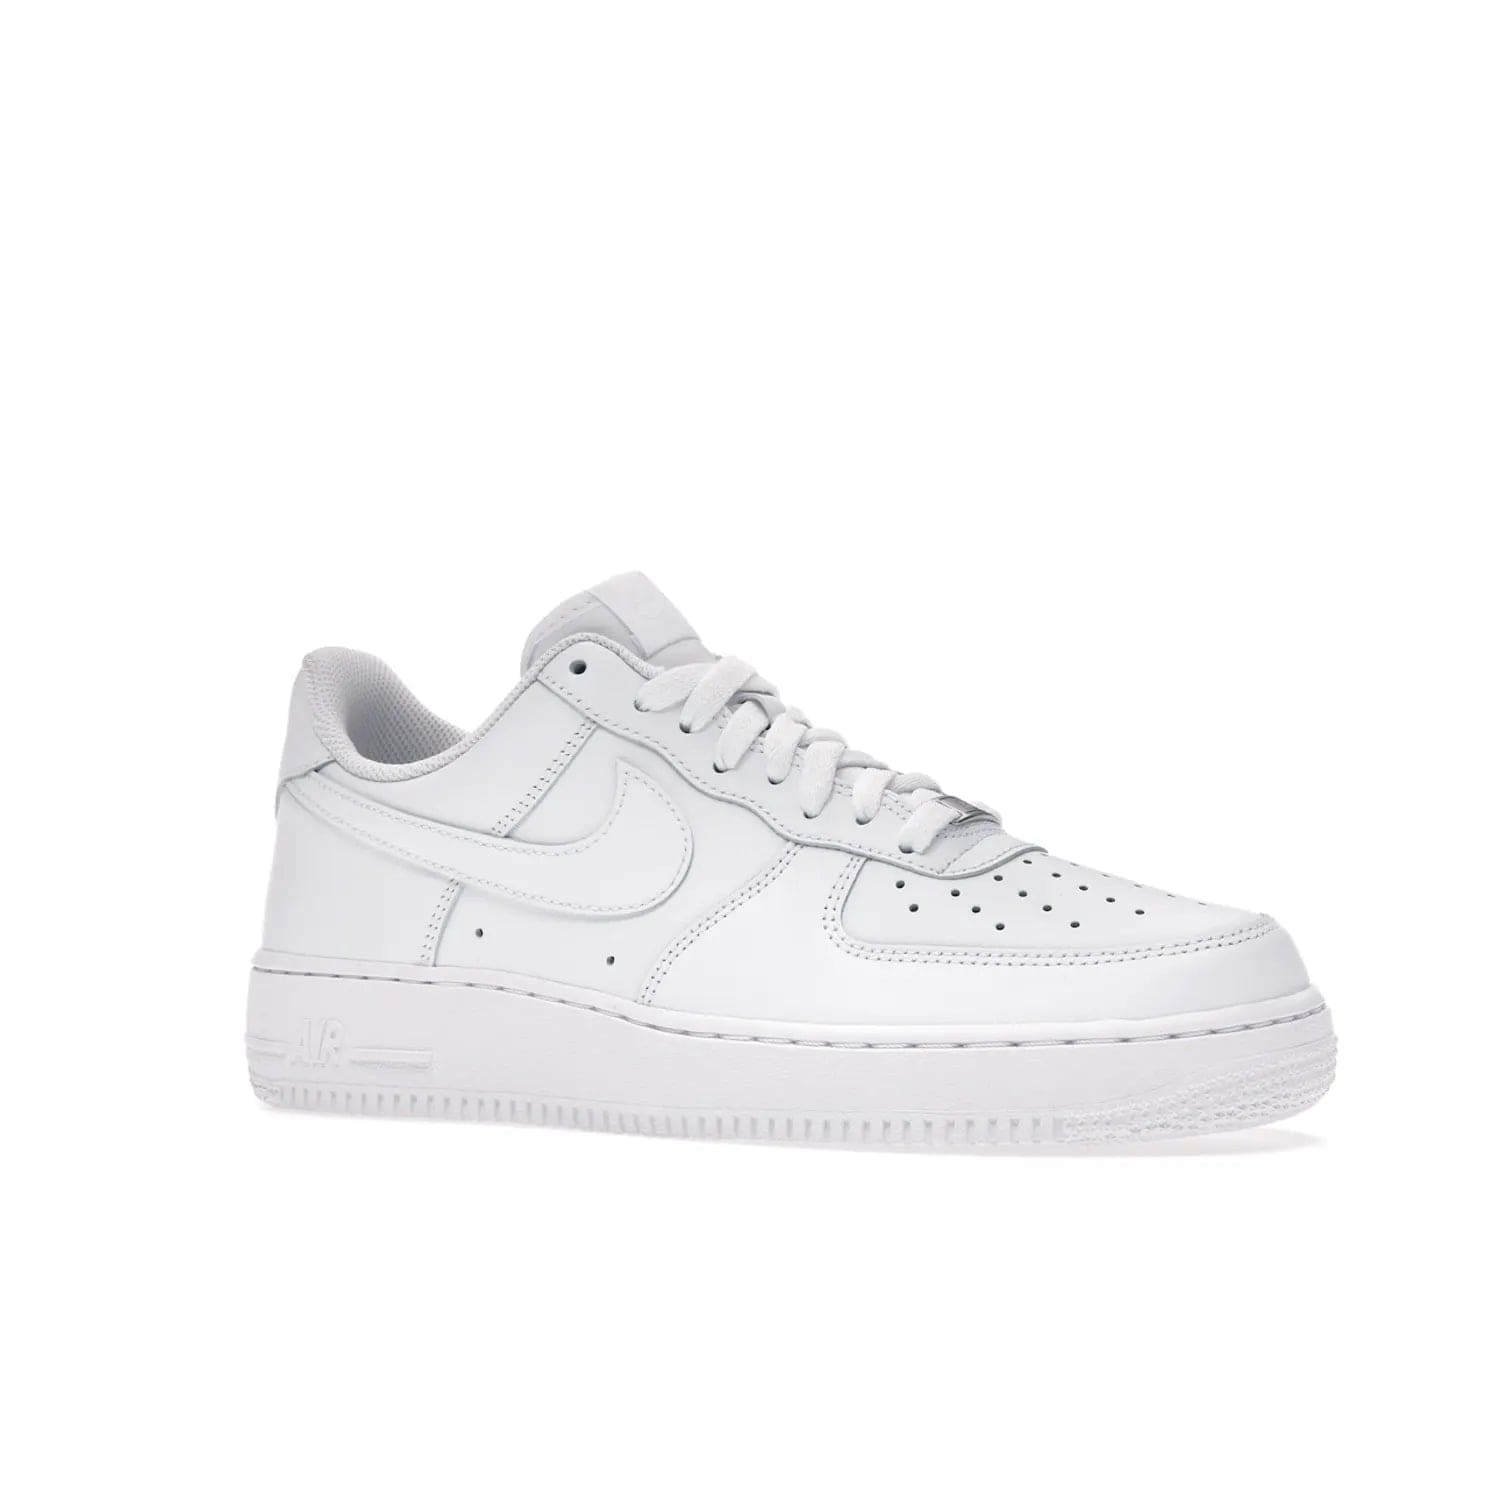 Nike Air Force 1 Low '07 White - Image 4 - Only at www.BallersClubKickz.com - ##
Iconic Swoosh overlays and crisp white sole make the classic Nike Air Force 1 Low White '07 an essential colorway. Classic for seasoned heads and new fans alike.